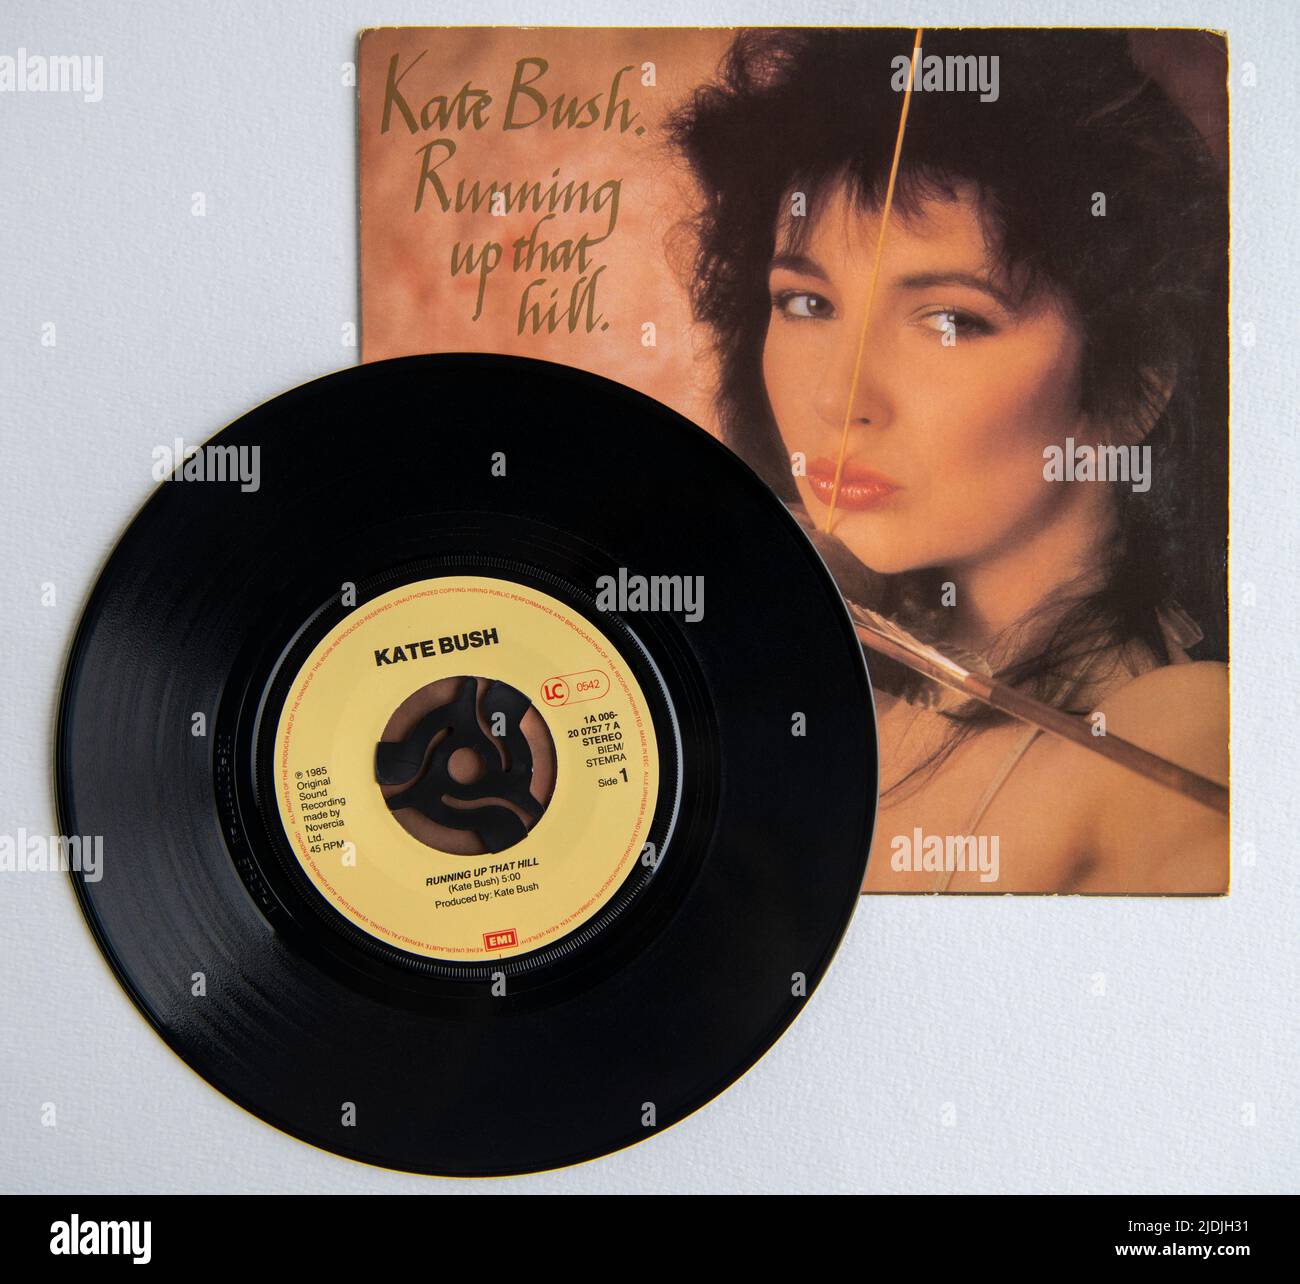 Kate bush running up that hill cover stock photography and images - Alamy